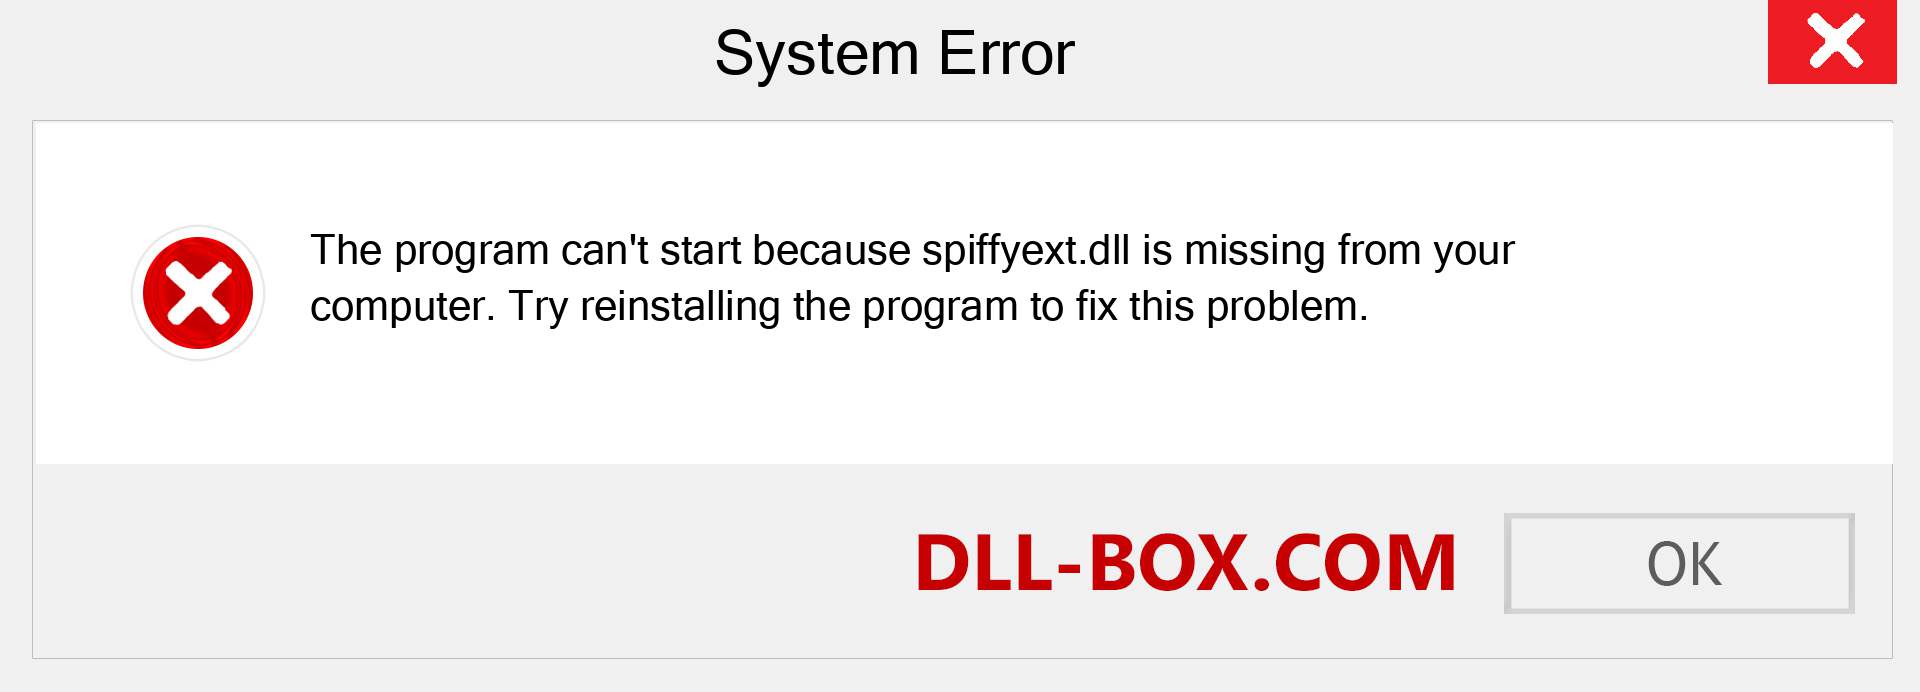  spiffyext.dll file is missing?. Download for Windows 7, 8, 10 - Fix  spiffyext dll Missing Error on Windows, photos, images